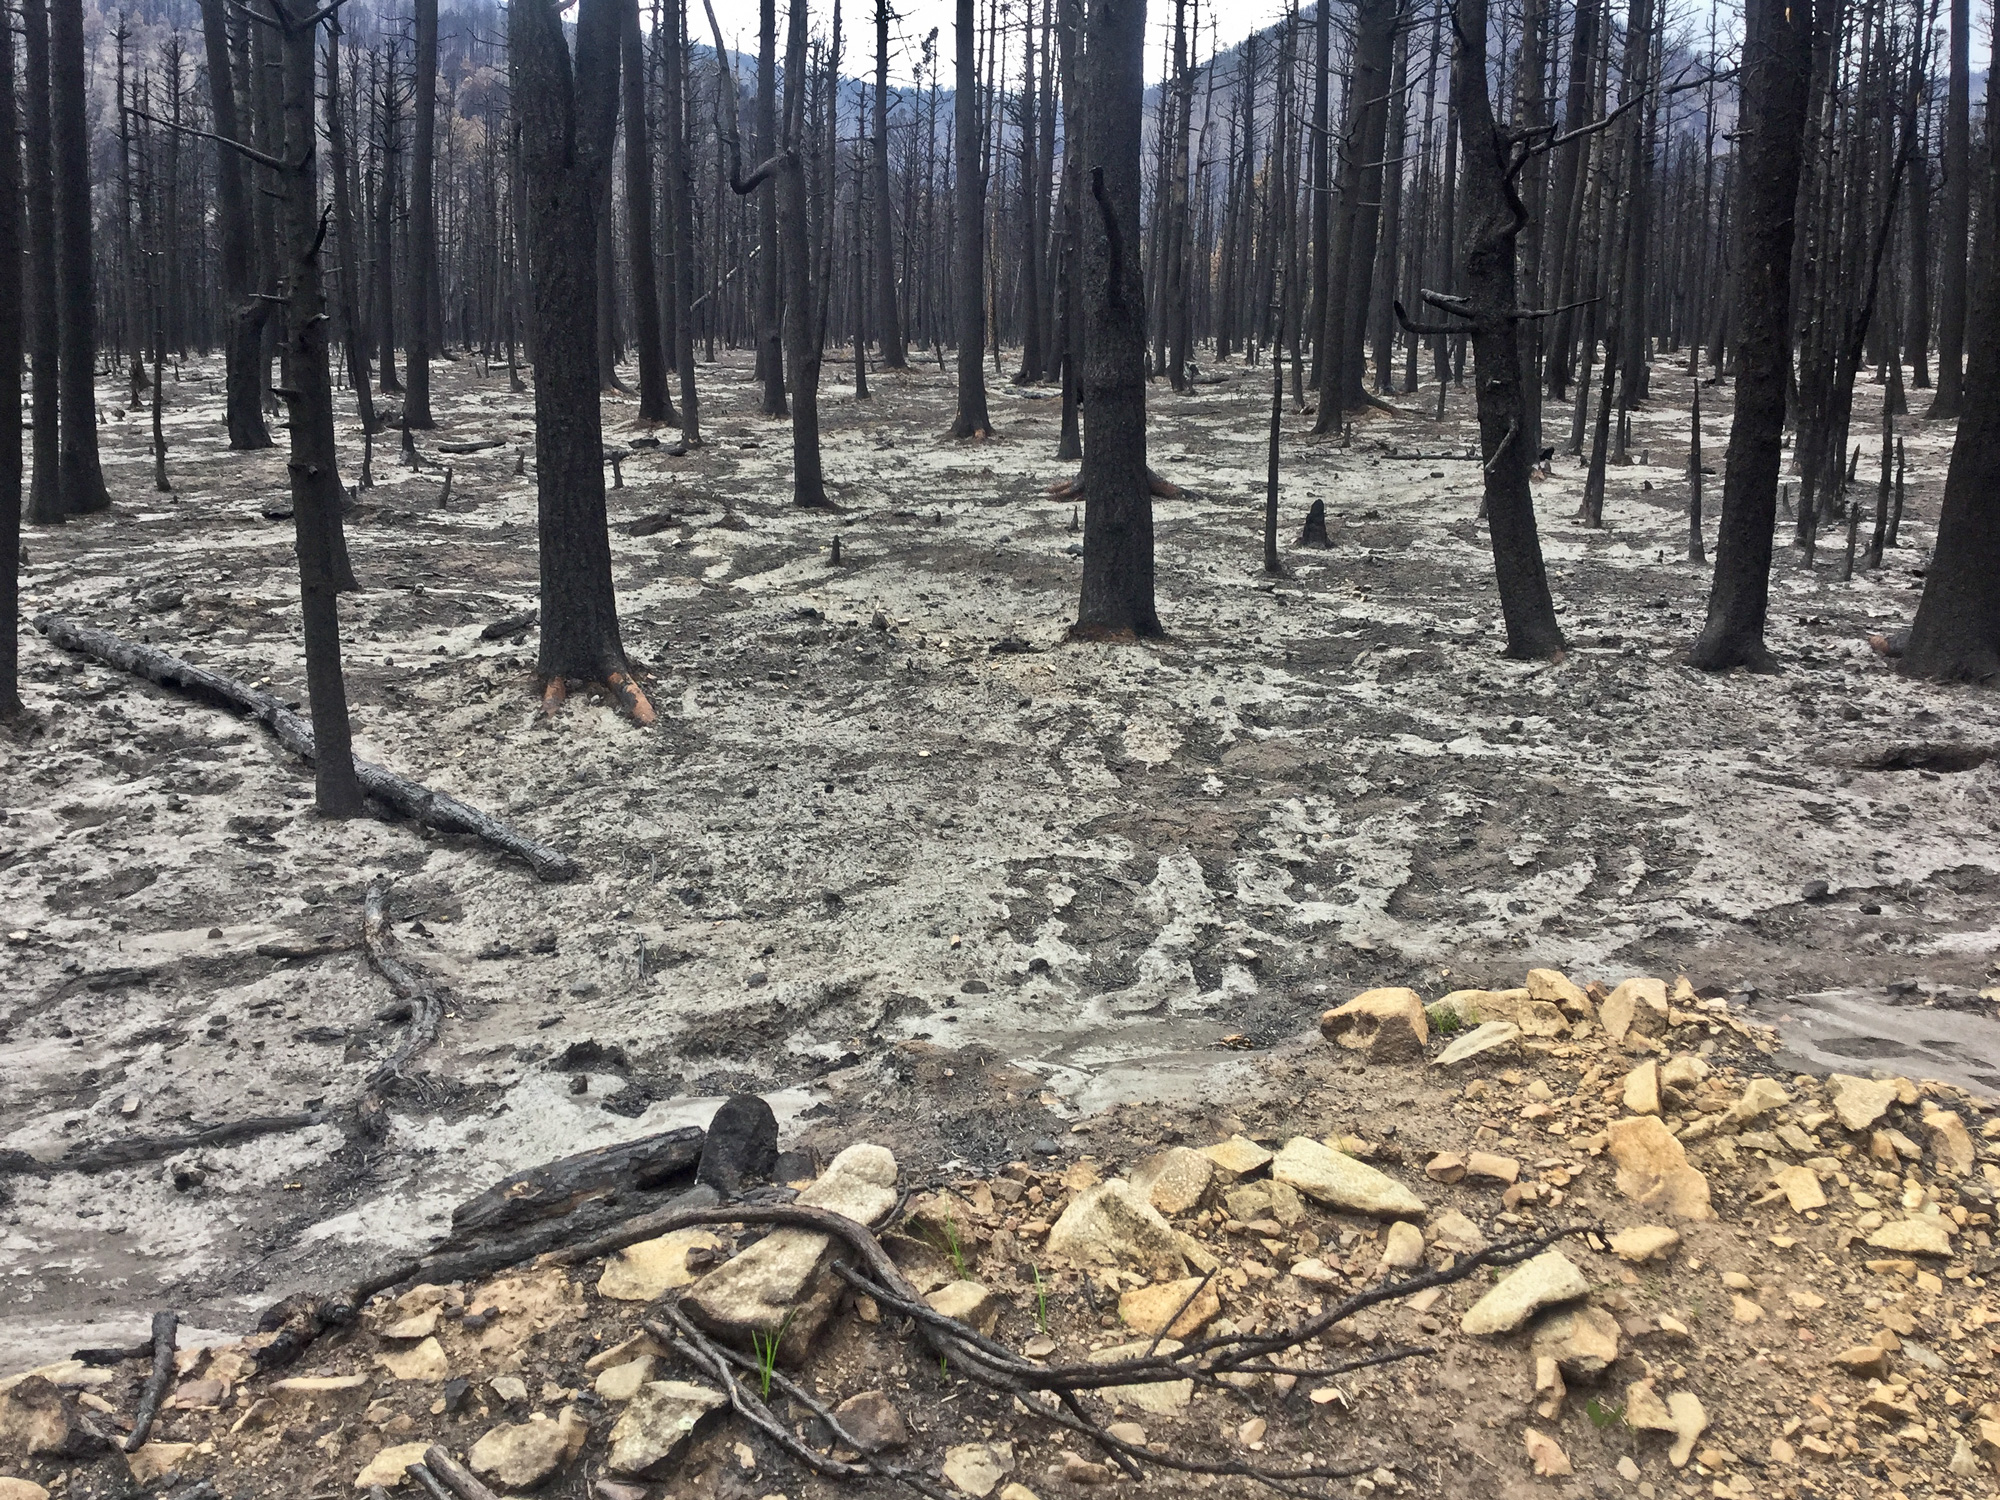 Burned area ripe for a mud flow, given some precipitation, Paradise Acres, Huerfano County, Colorado, August 2018. Photo credit: Kevin McCoy for the CGS.